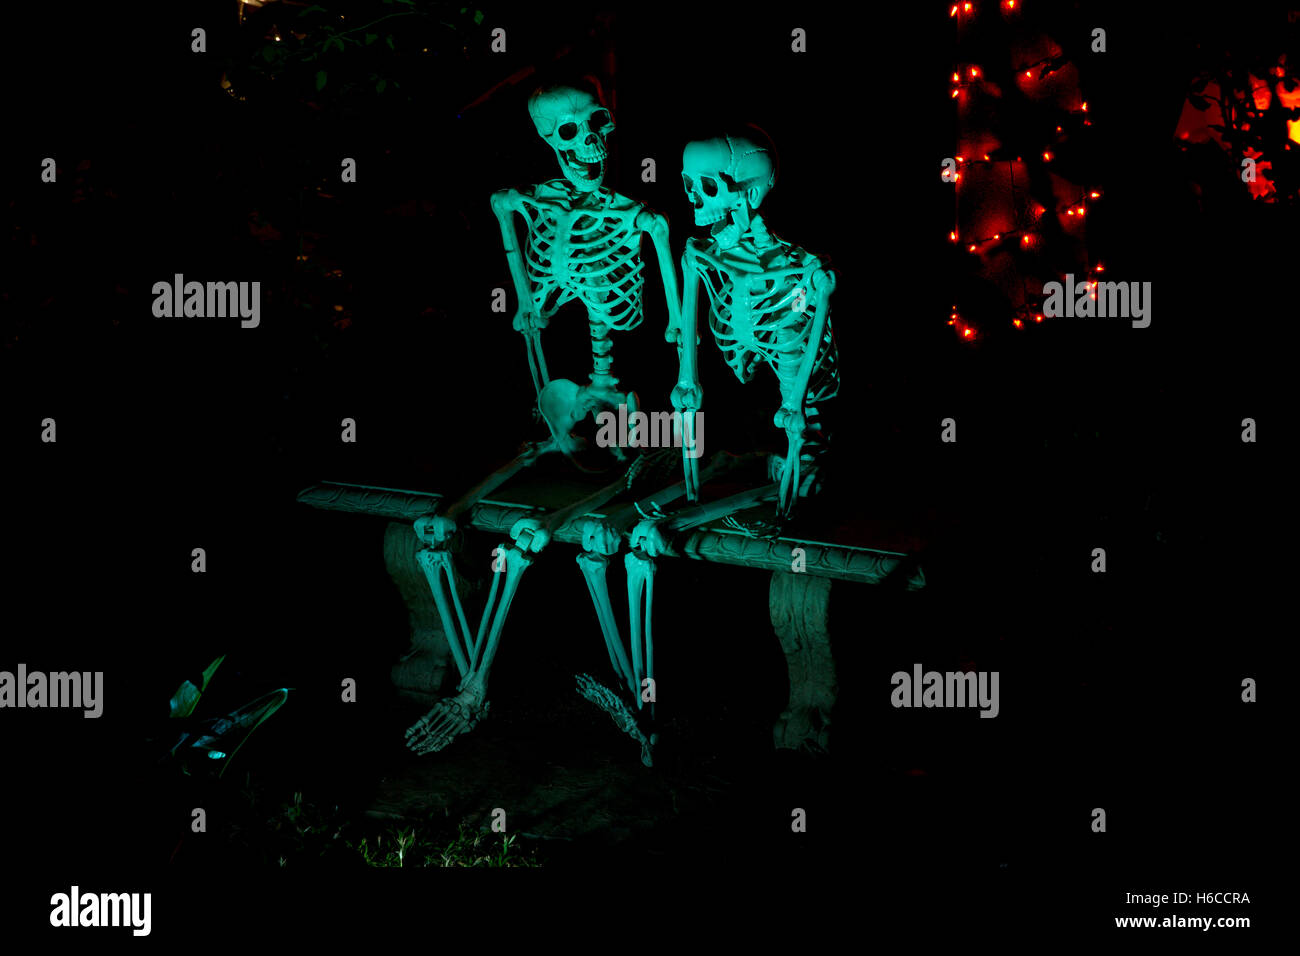 Two skeletons as part of a Halloween decoration. Stock Photo